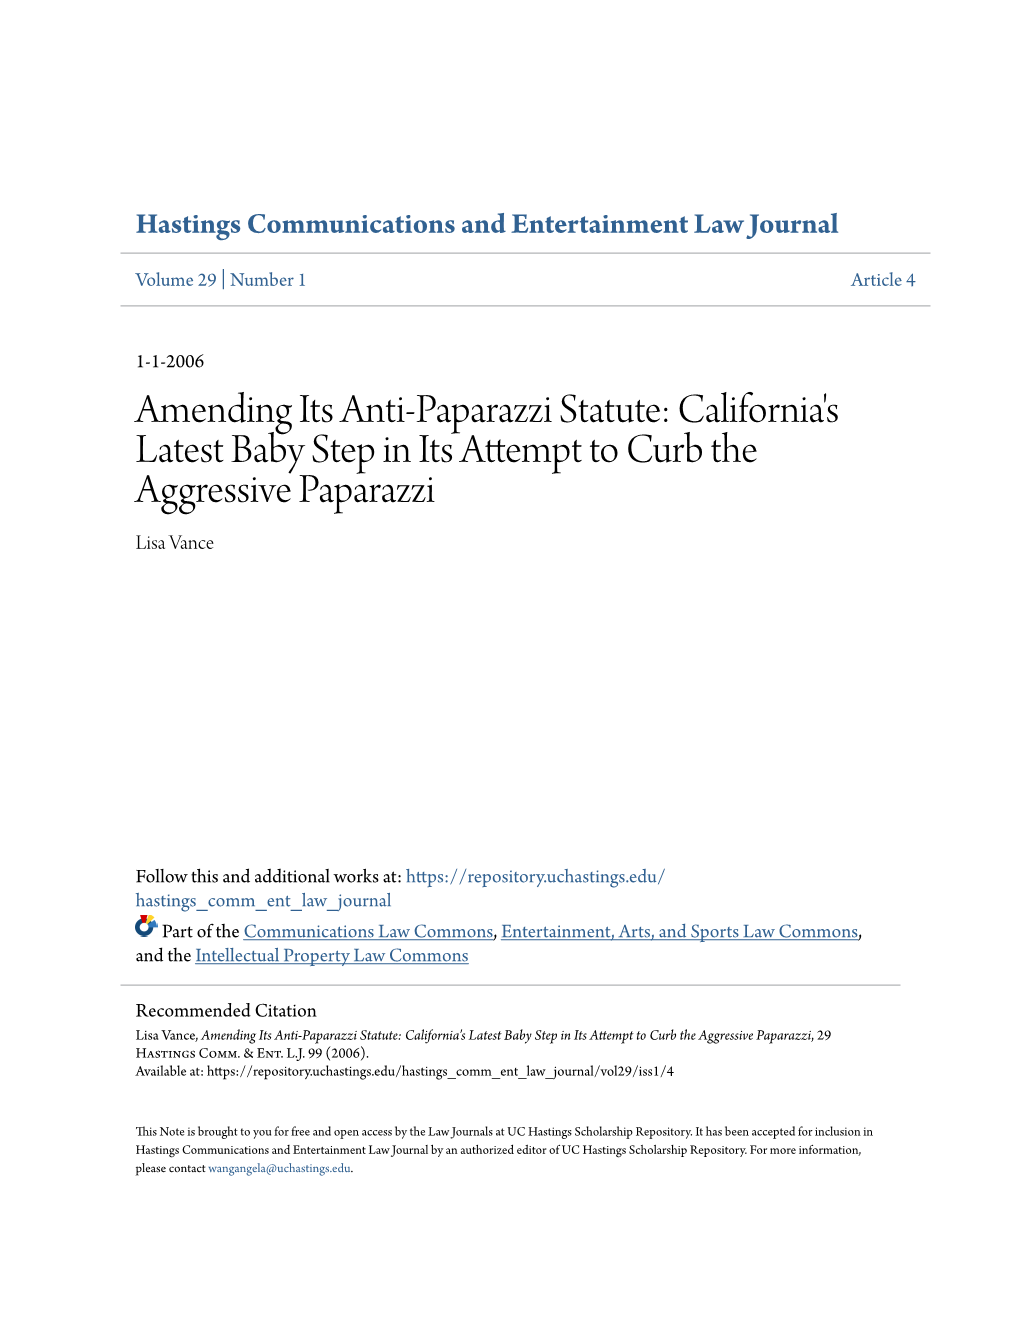 Amending Its Anti-Paparazzi Statute: California's Latest Baby Step in Its Attempt to Curb the Aggressive Paparazzi Lisa Vance